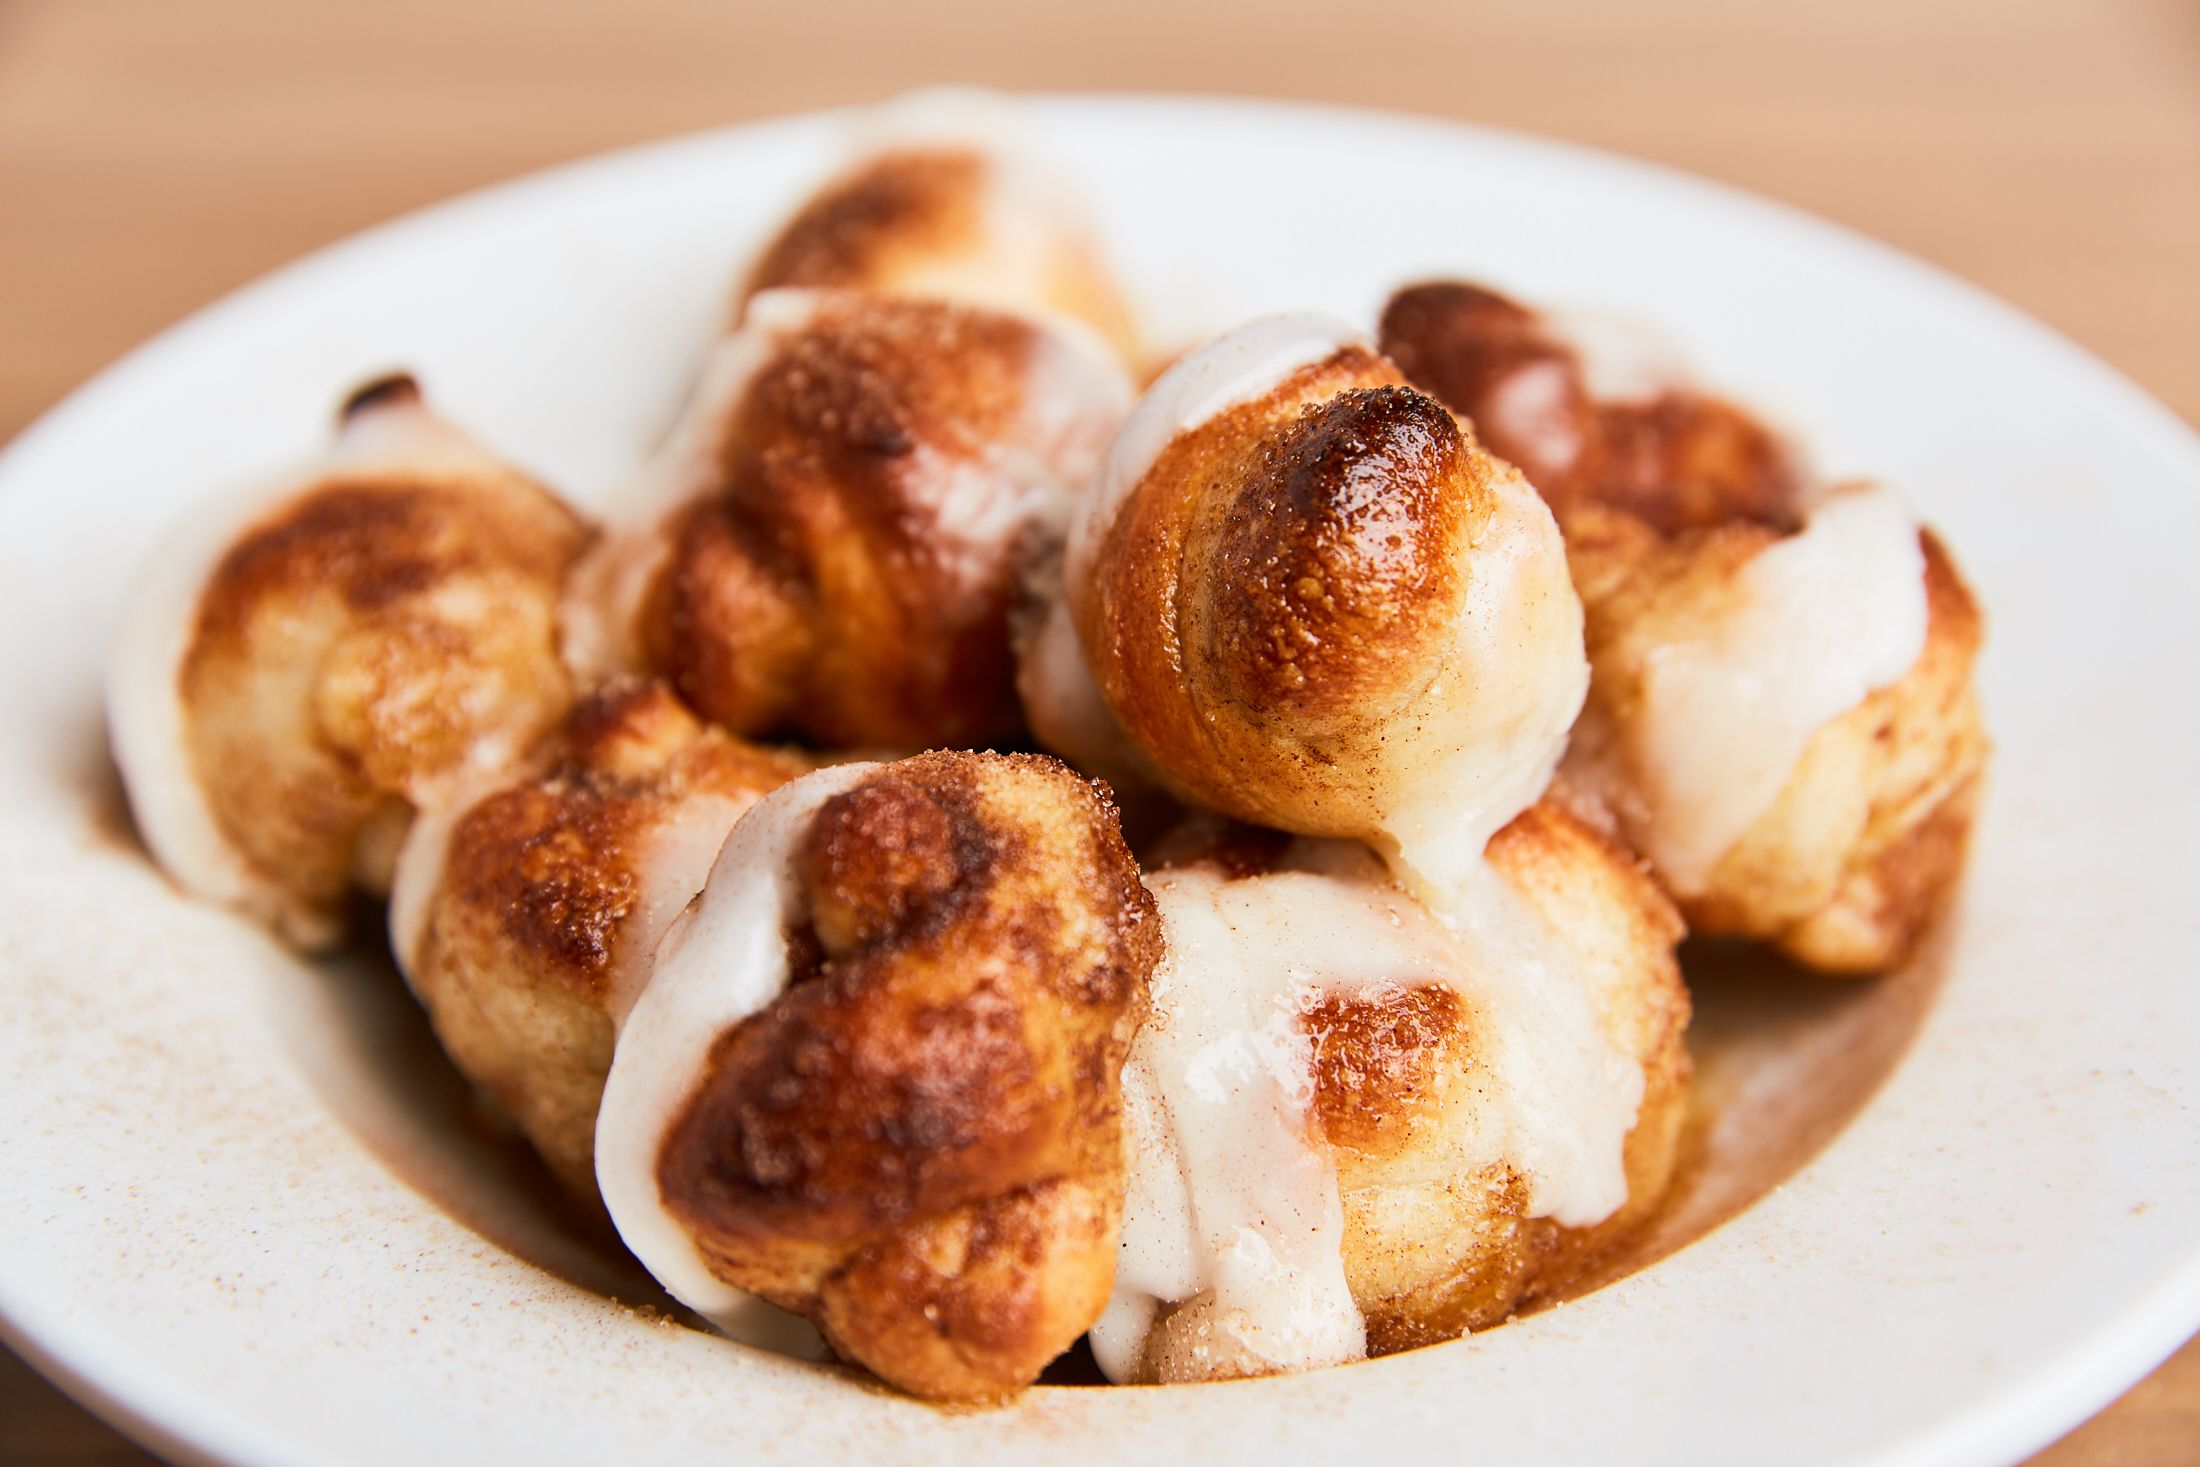 CINNAMON KNOTS (WITH ICING) - Our homemade dough knots with butter and sprinkled sugar and cinnamon. Johnny's New York Style Pizza Snellville (770)978-8180